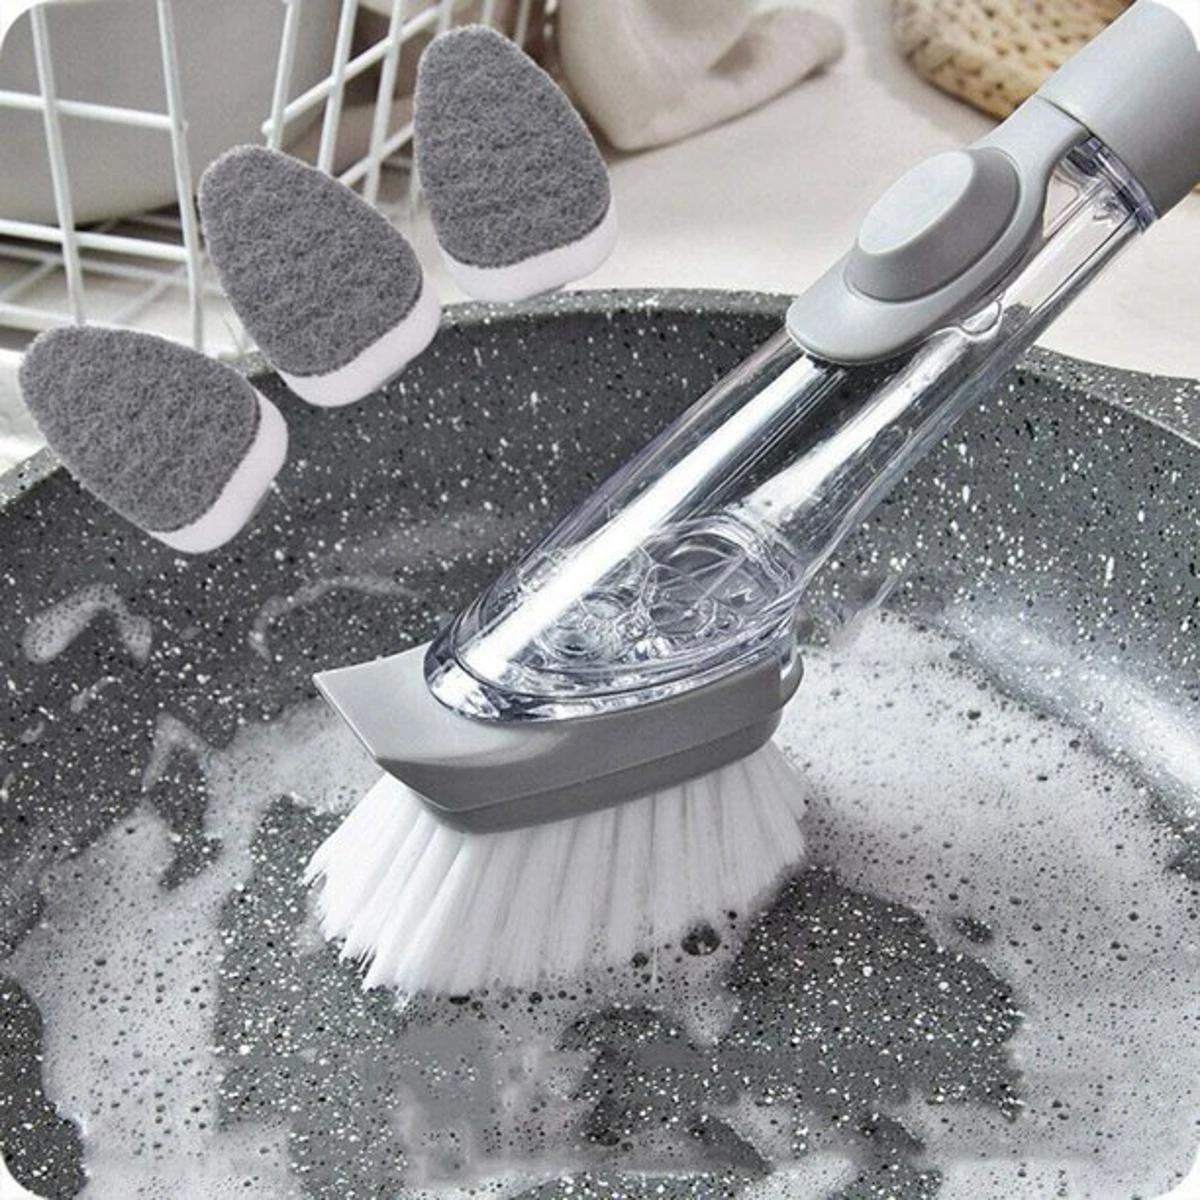 Kitchen Cleaning Brush Scrubber Dish Bowl Washing Sponge with Refill Liquid Soap Dispenser Automatic Soap Dish Cleaning Brush